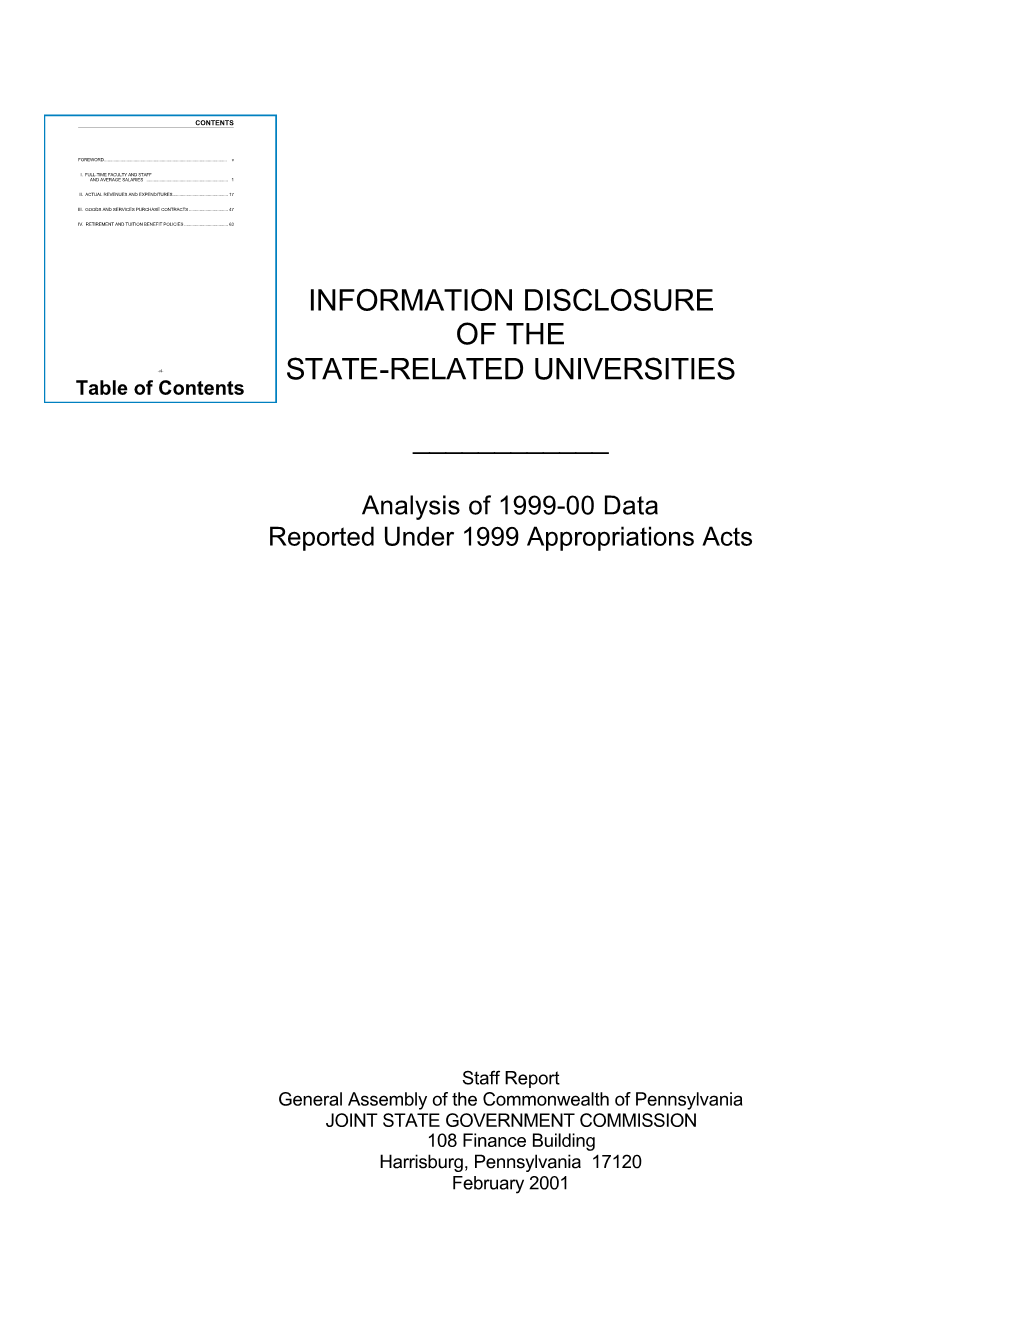 Information Disclosure of the State-Related Universities